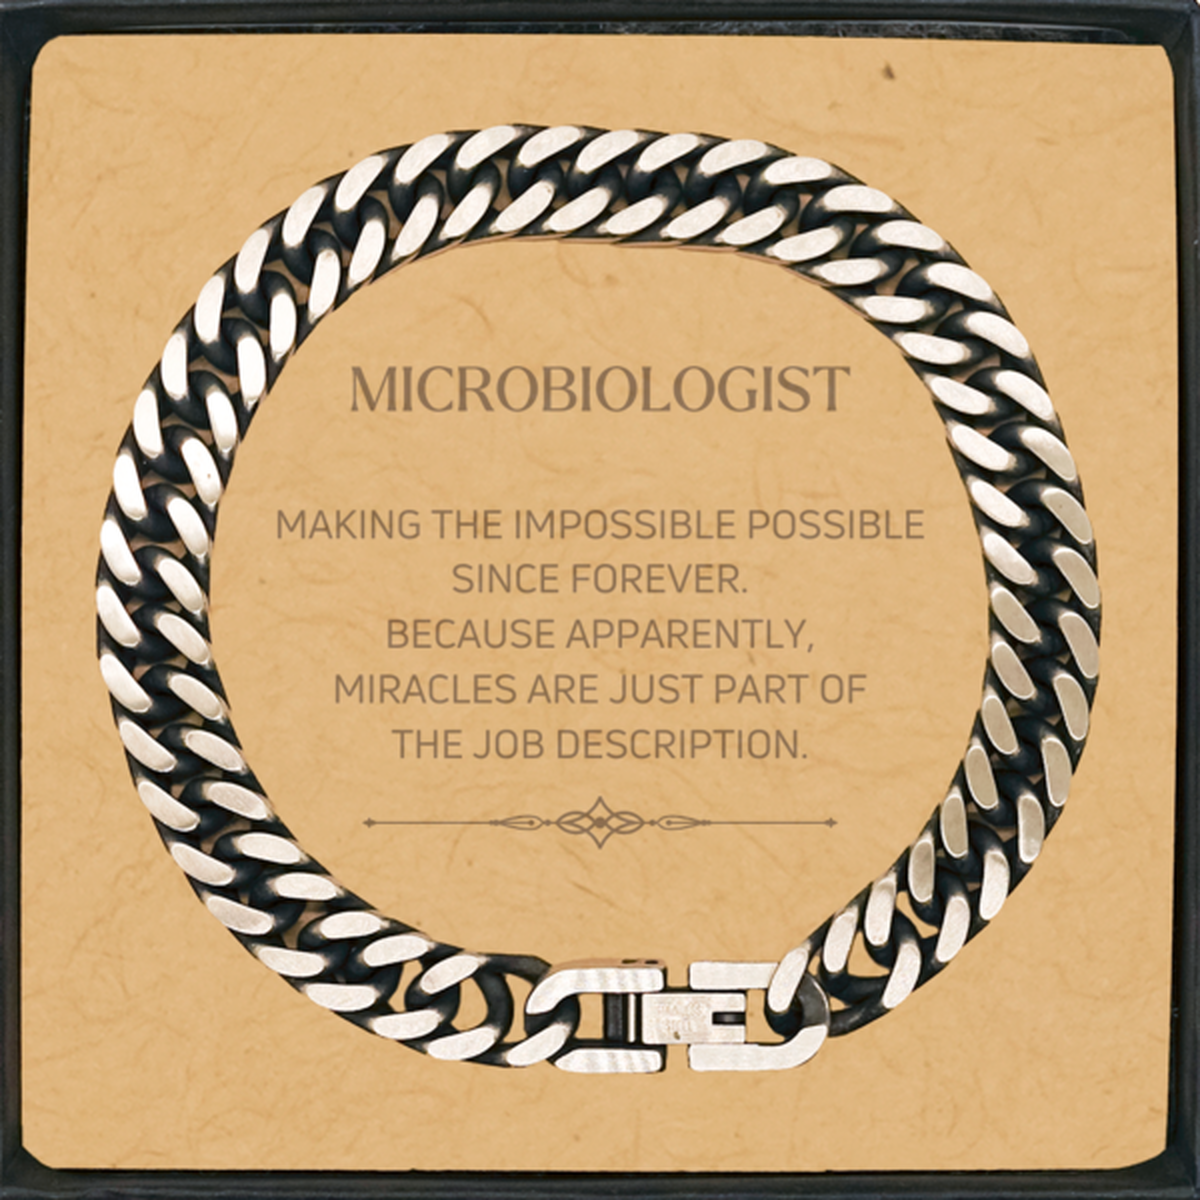 Funny Microbiologist Gifts, Miracles are just part of the job description, Inspirational Birthday Cuban Link Chain Bracelet For Microbiologist, Men, Women, Coworkers, Friends, Boss